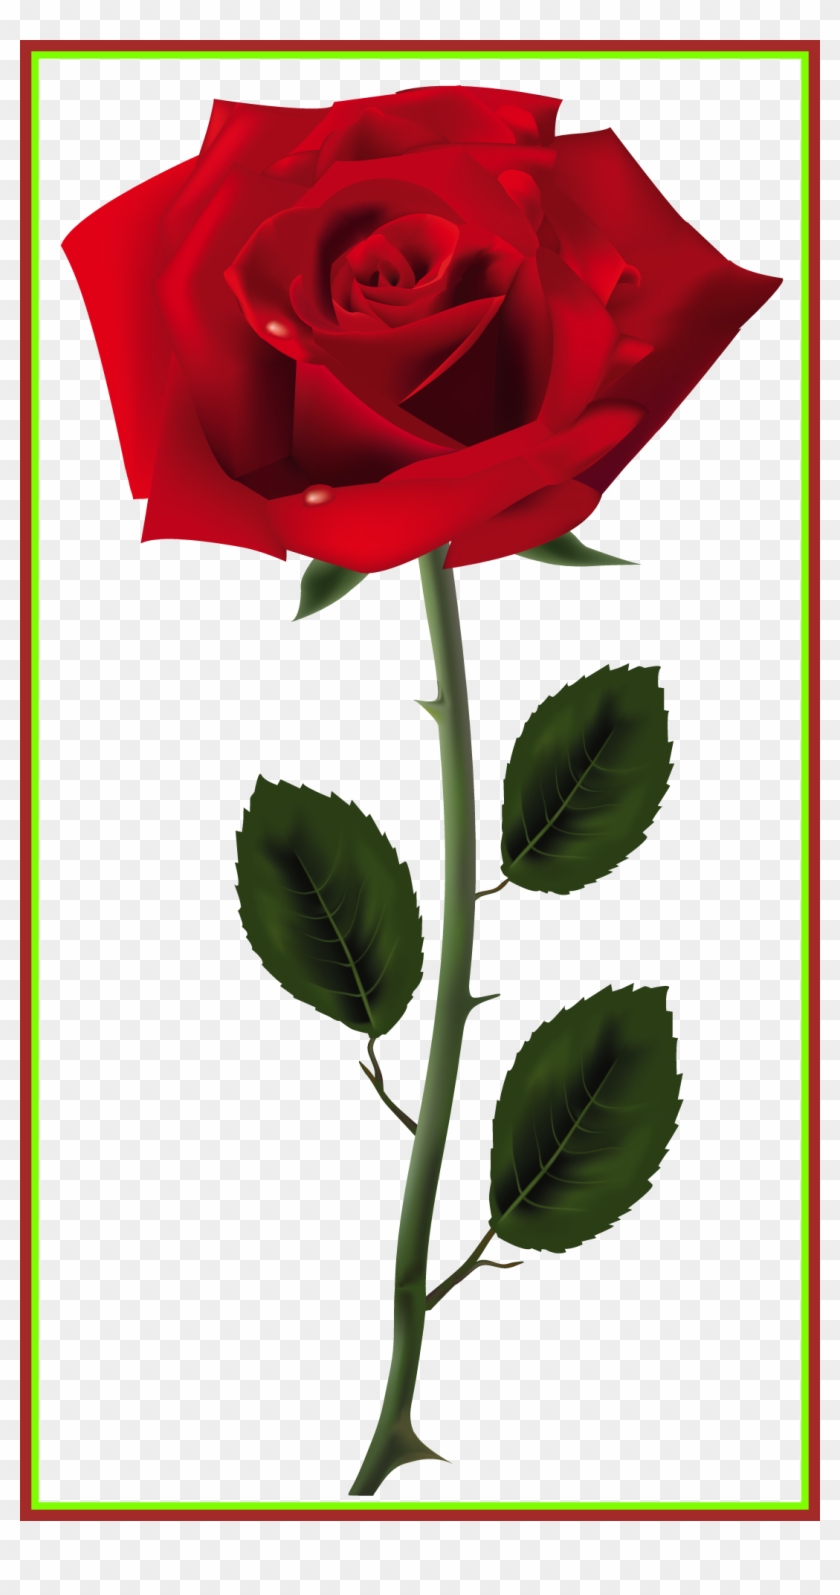 Incredible Red Rose Png Art Picture Colors Shades Of - Red Rose Png Transparent #1005480